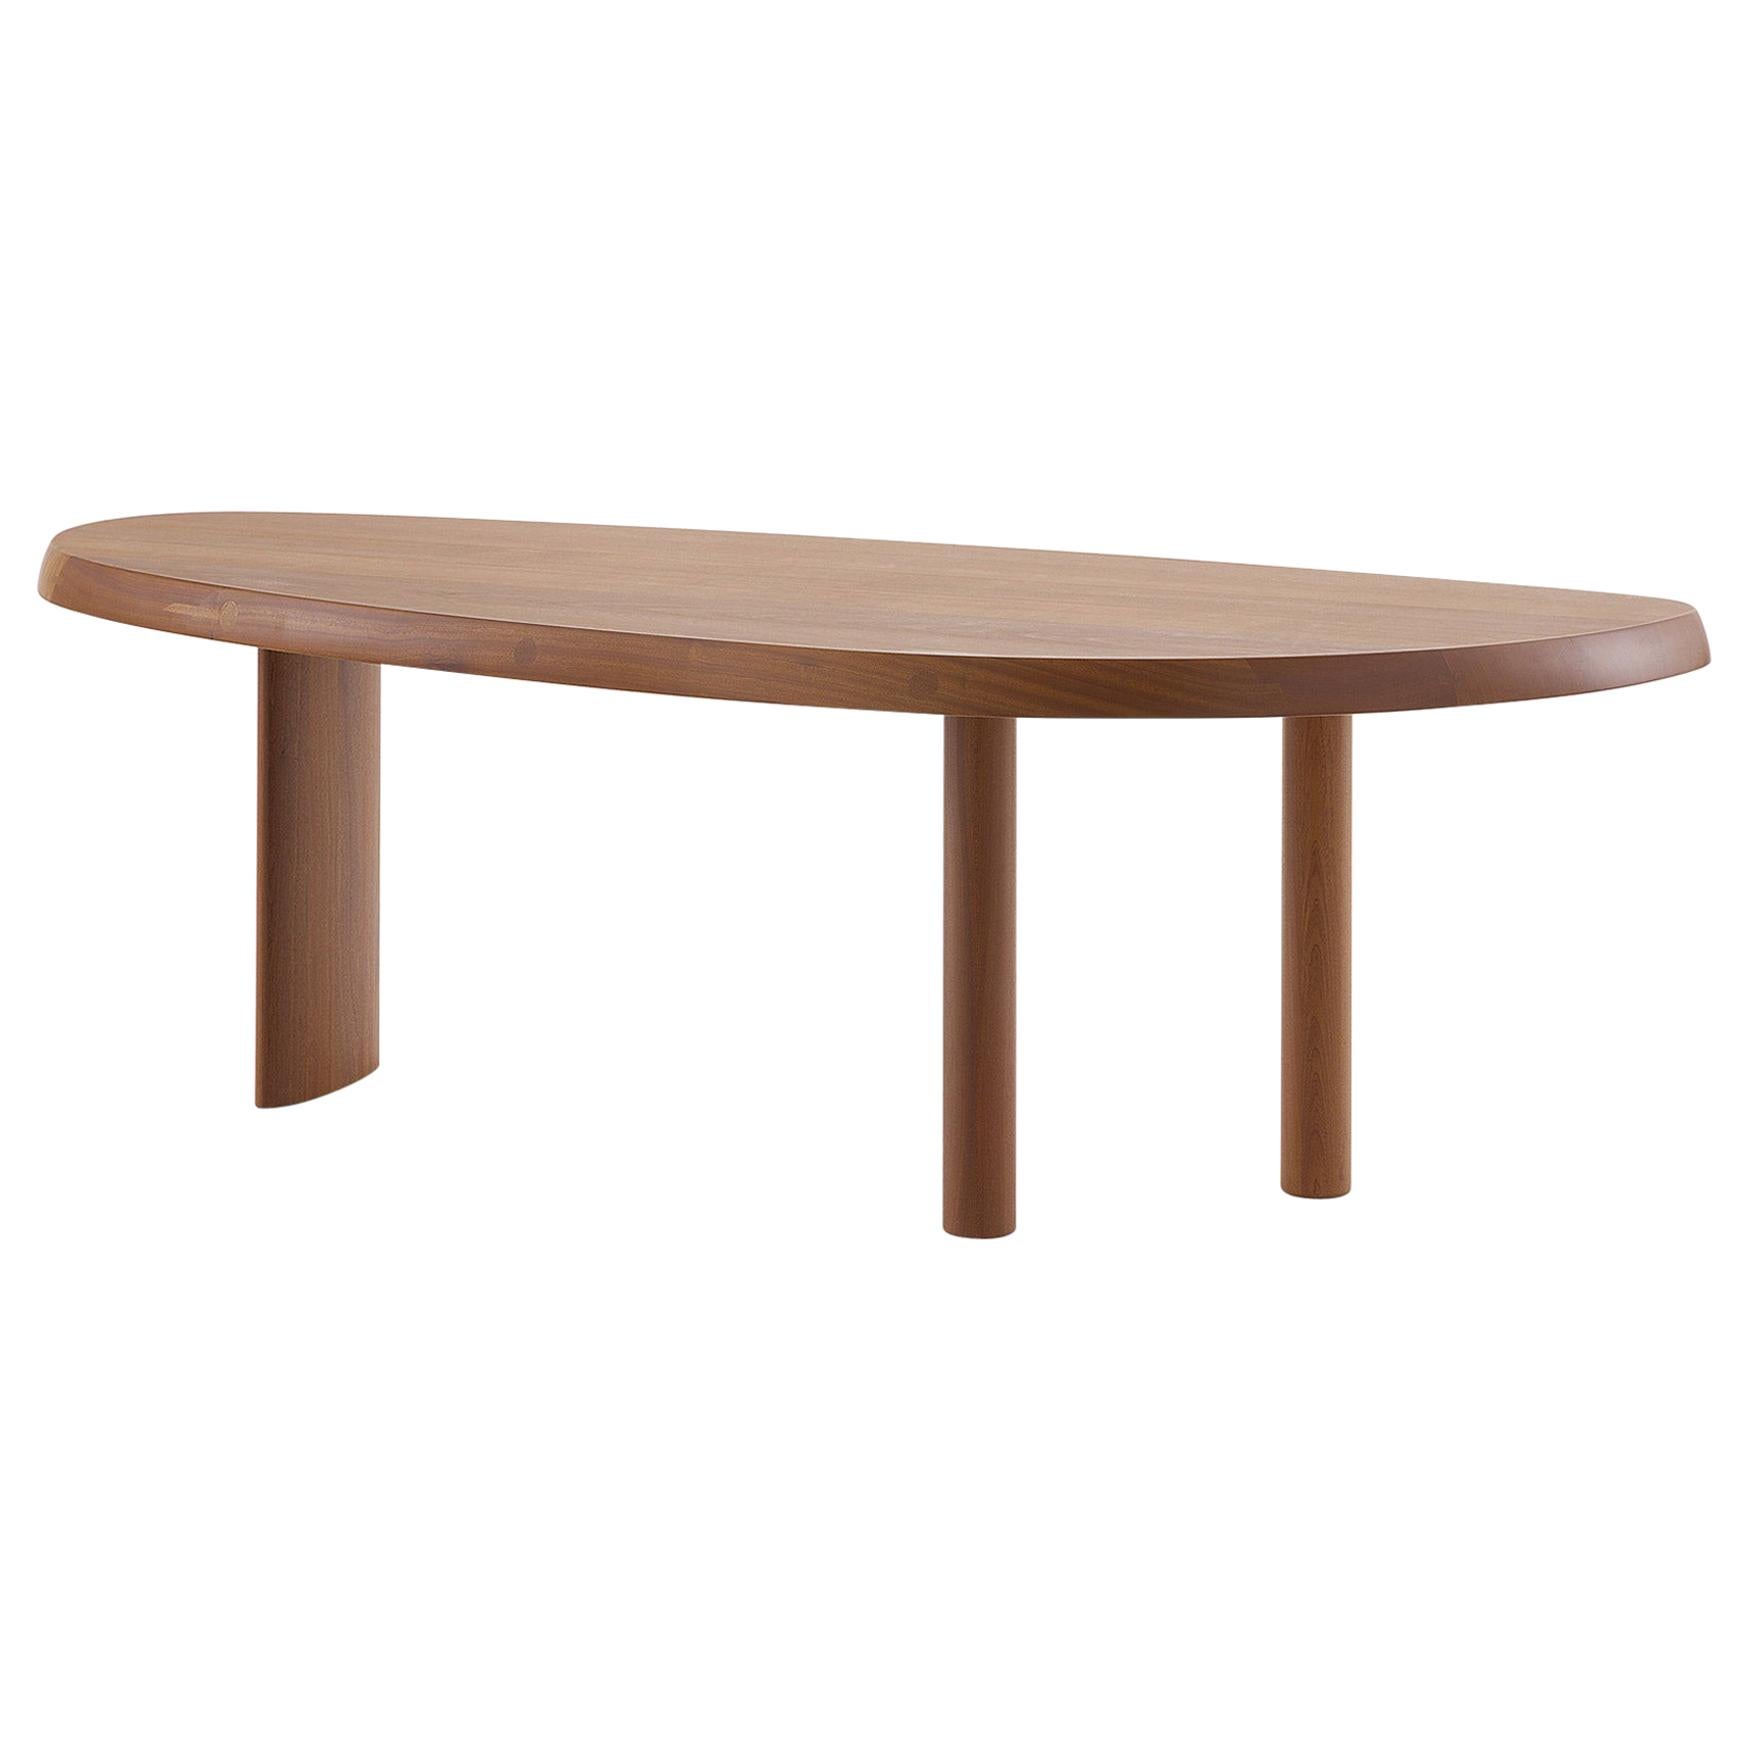 Italian Charlotte Perriand Table En Forme Libre, Glacé Brown Lacquered Wood by Cassina